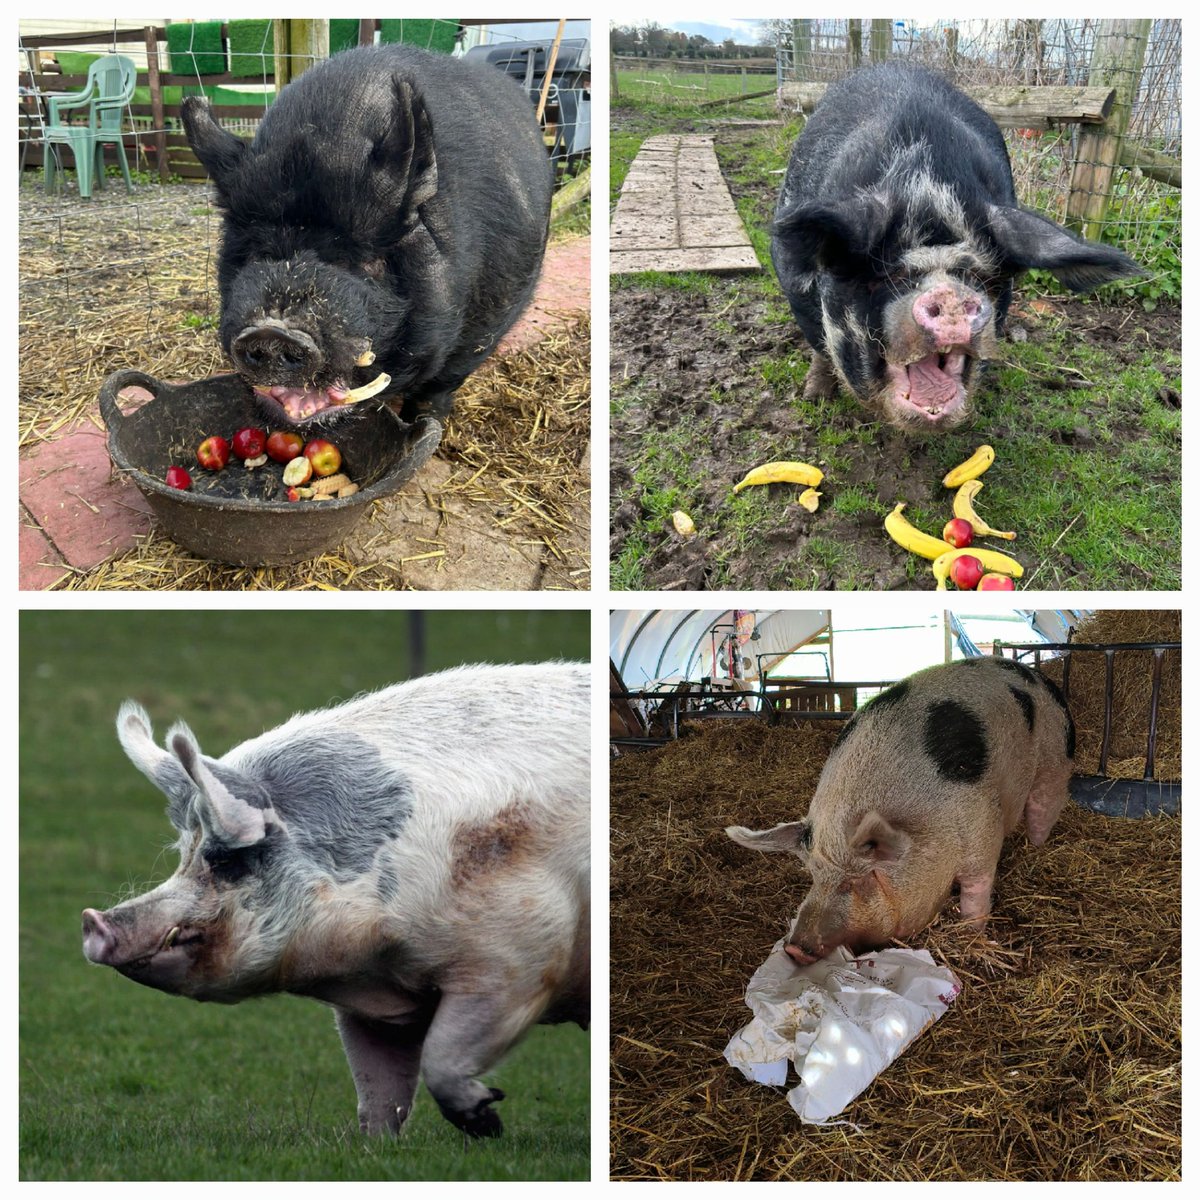 #TobyPig 
#PennyPig
#WilmaPig 
#BigGeorgePig 
We love you 🤗
We respect you 🥰
We will protect you & speak up for your kind – & the right of ALL pigs not to be commoditised, incarcerated & killed without mercy – for as long as we live 🐖
#NationalPigDay